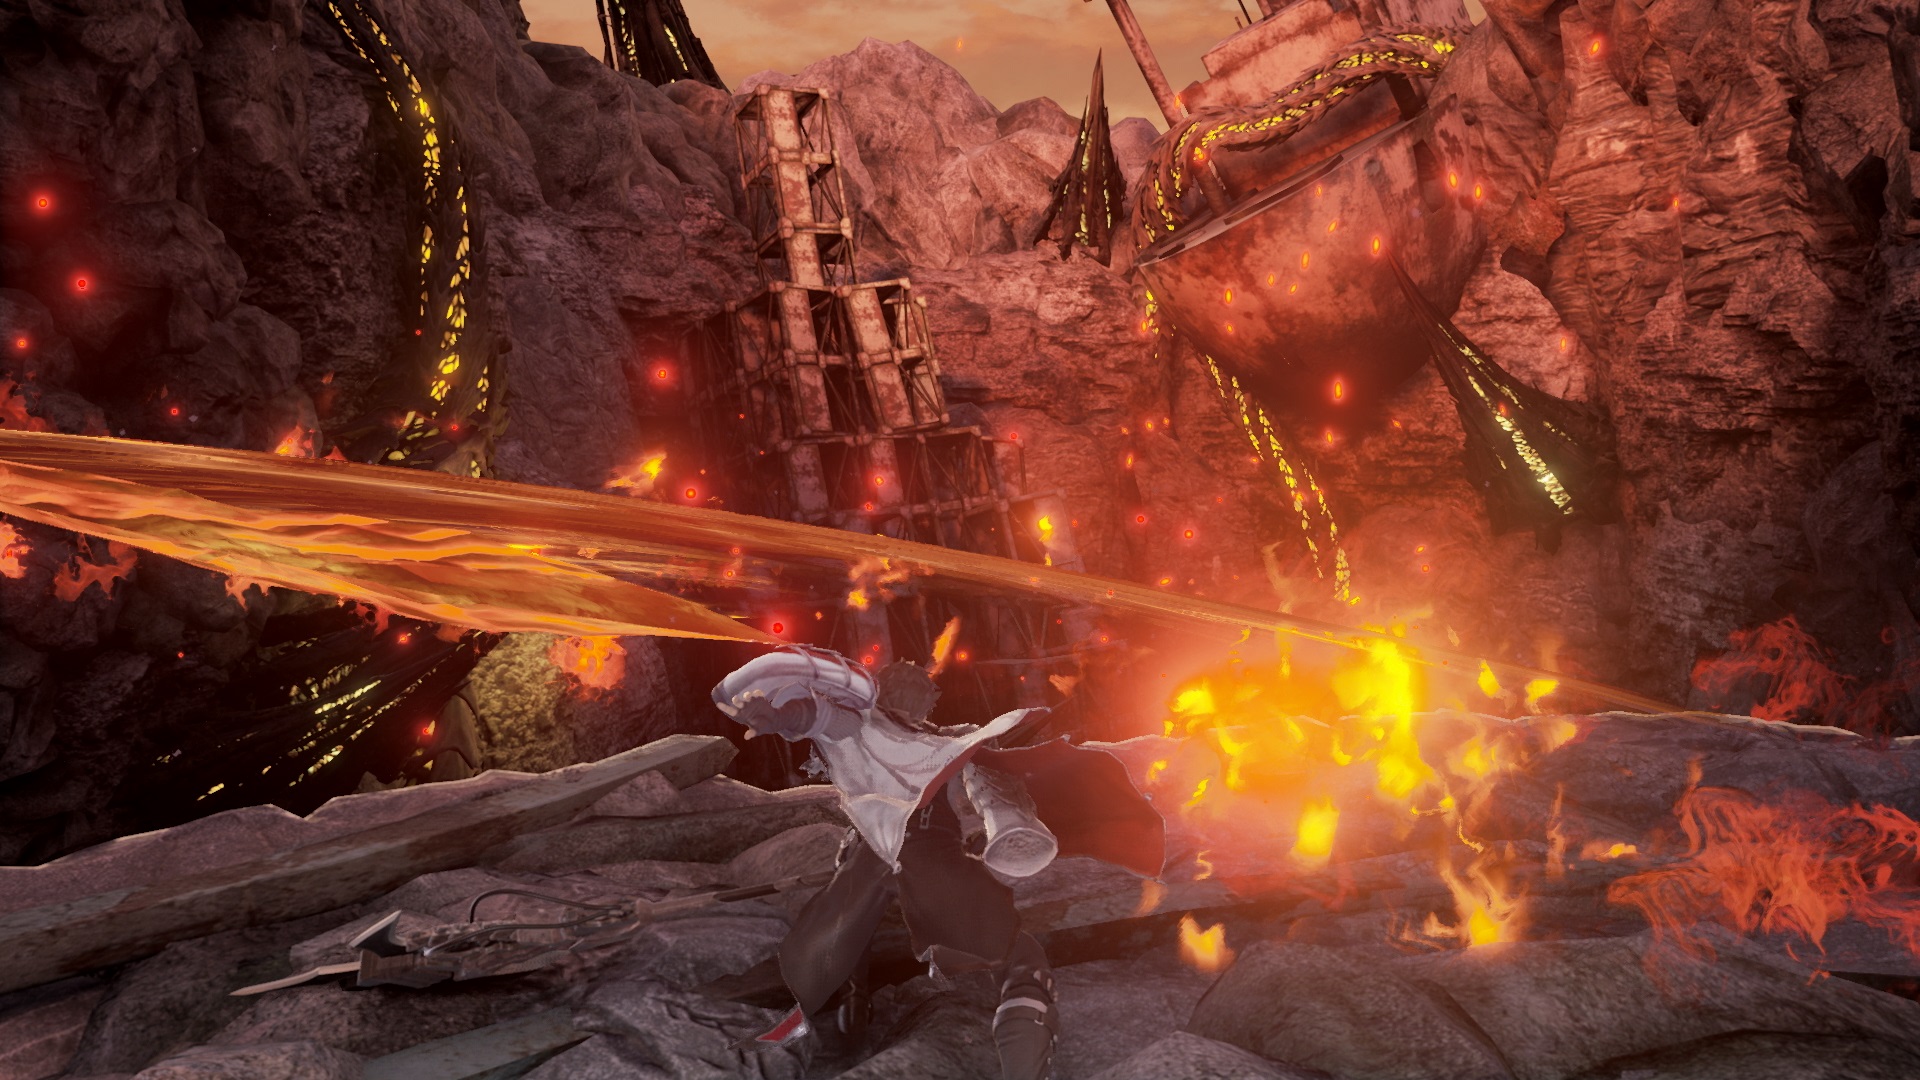 Code Vein Xbox One review: Is this apocalyptic Souls-like worth buying?